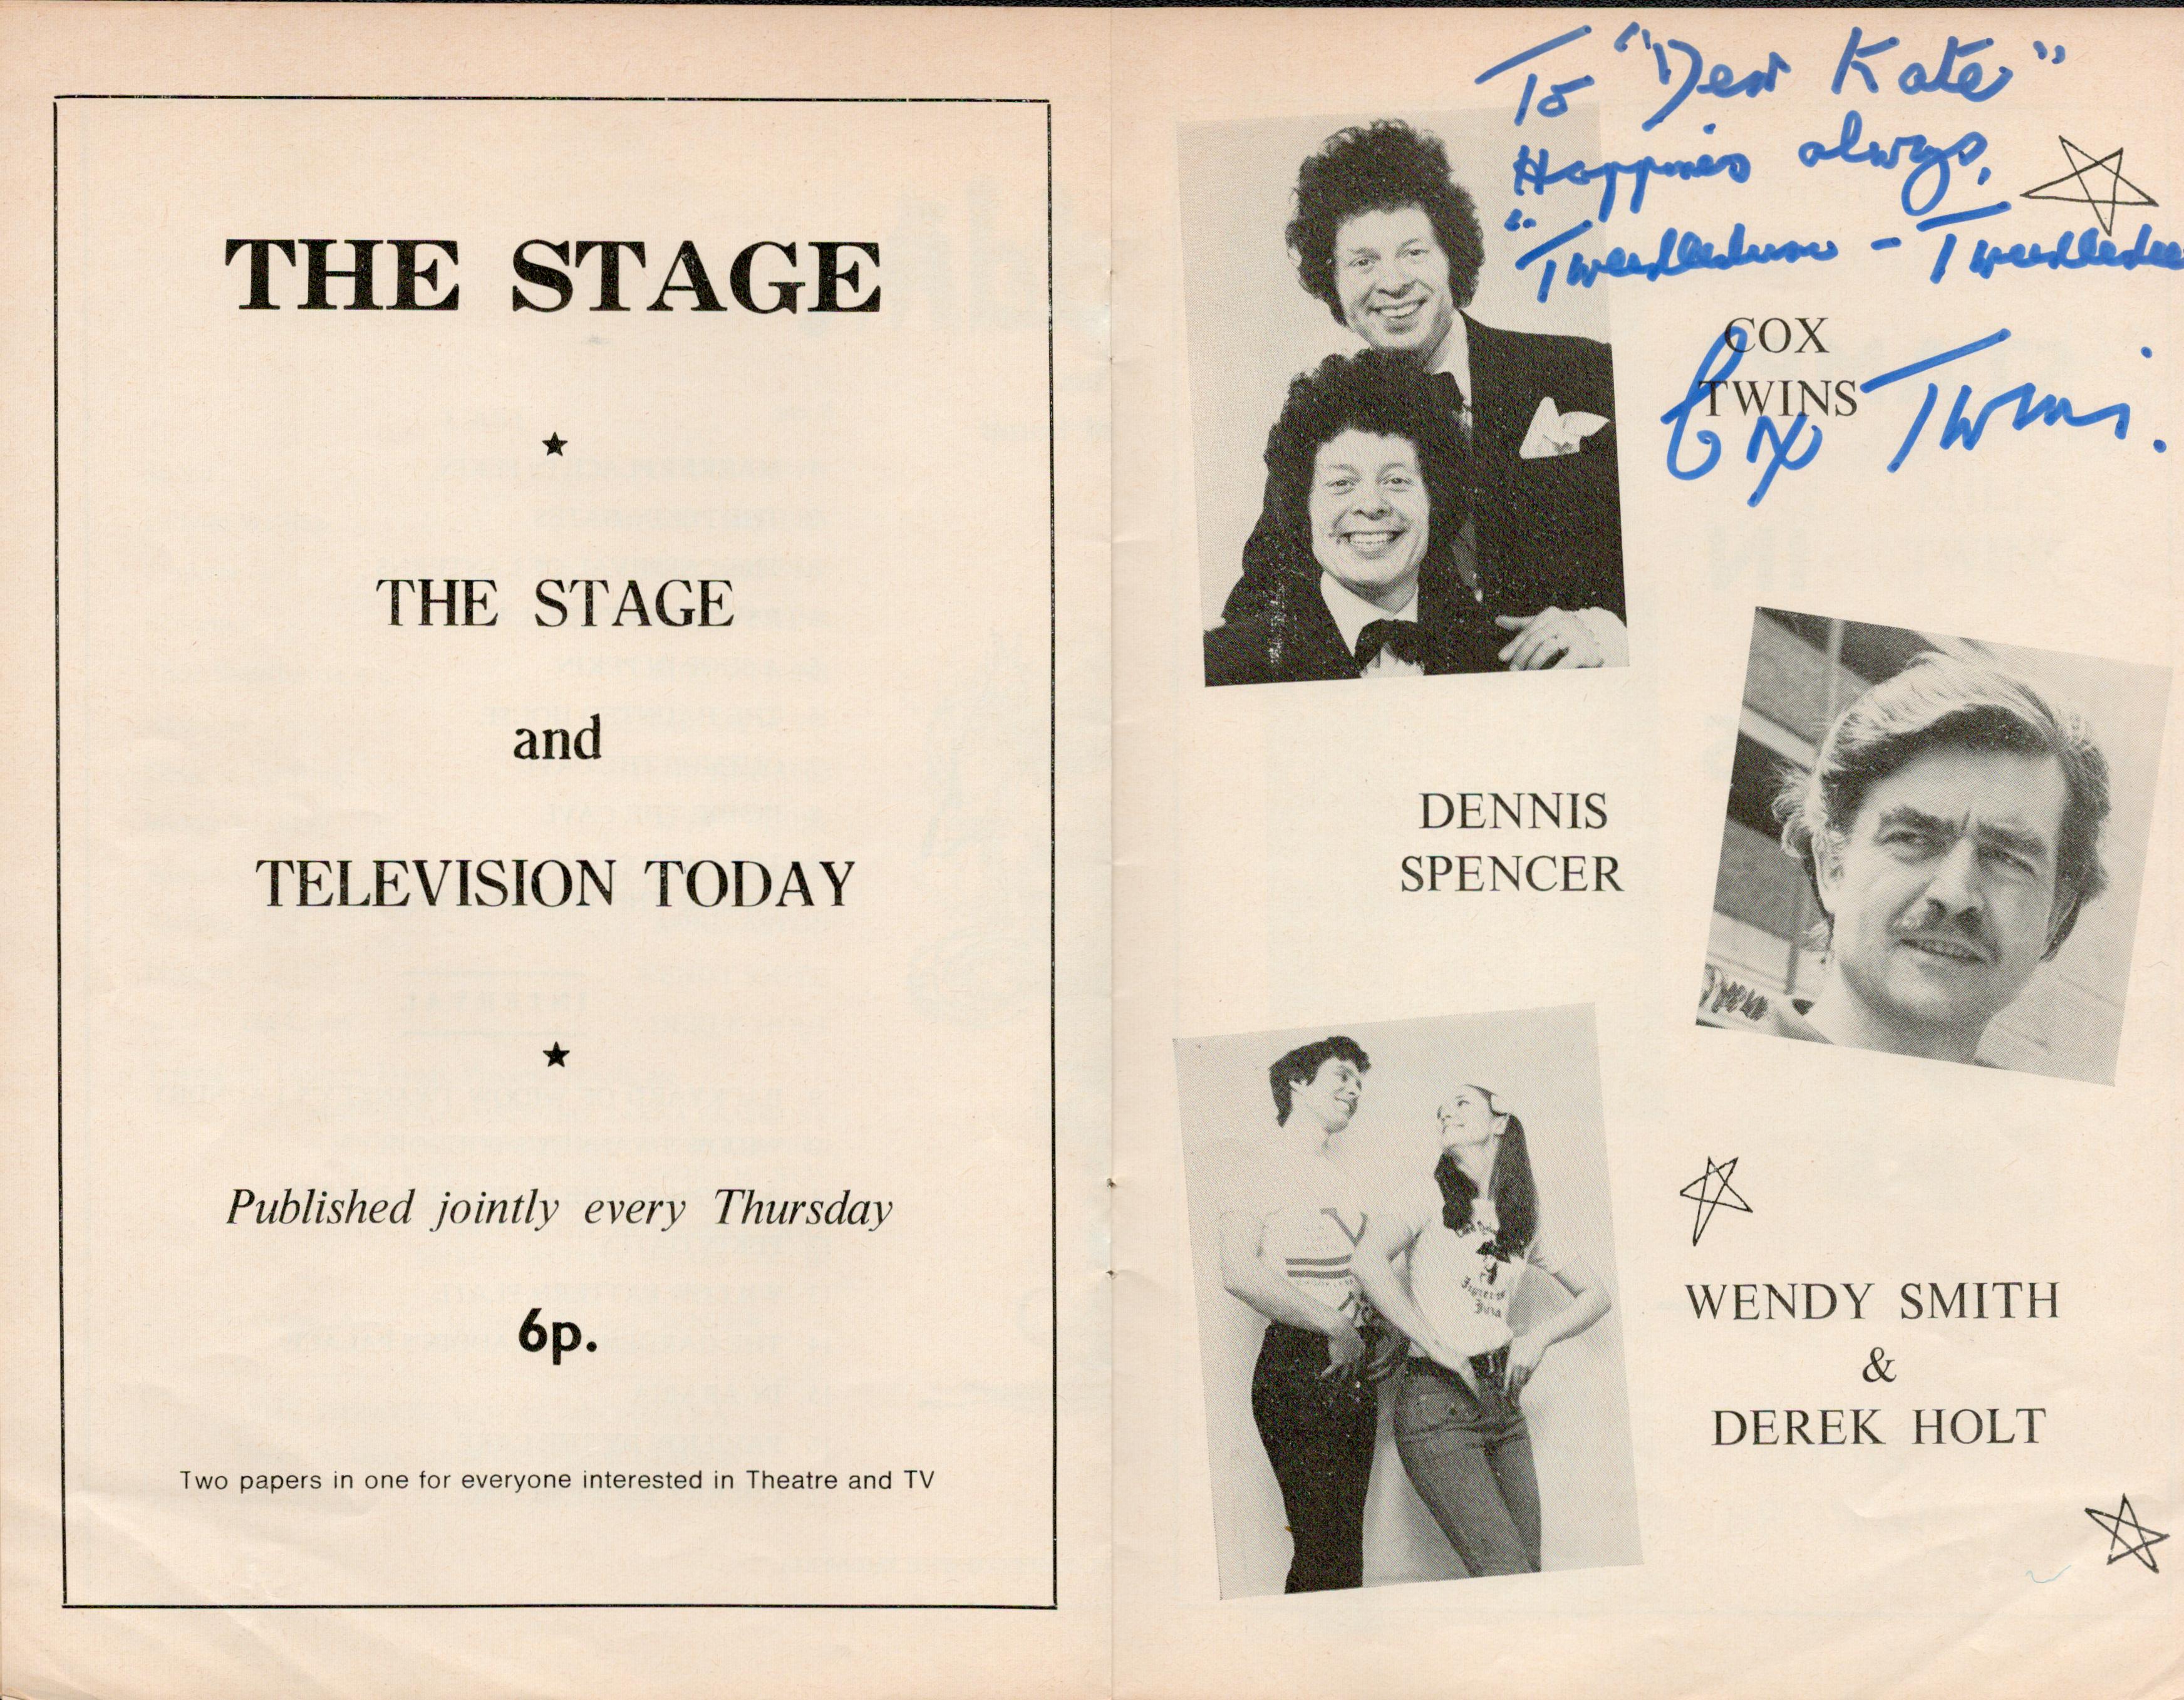 Theatre Harry Worth and Multi signed Pantomime Programme of 'Aladdin'. A hand signed copy of the